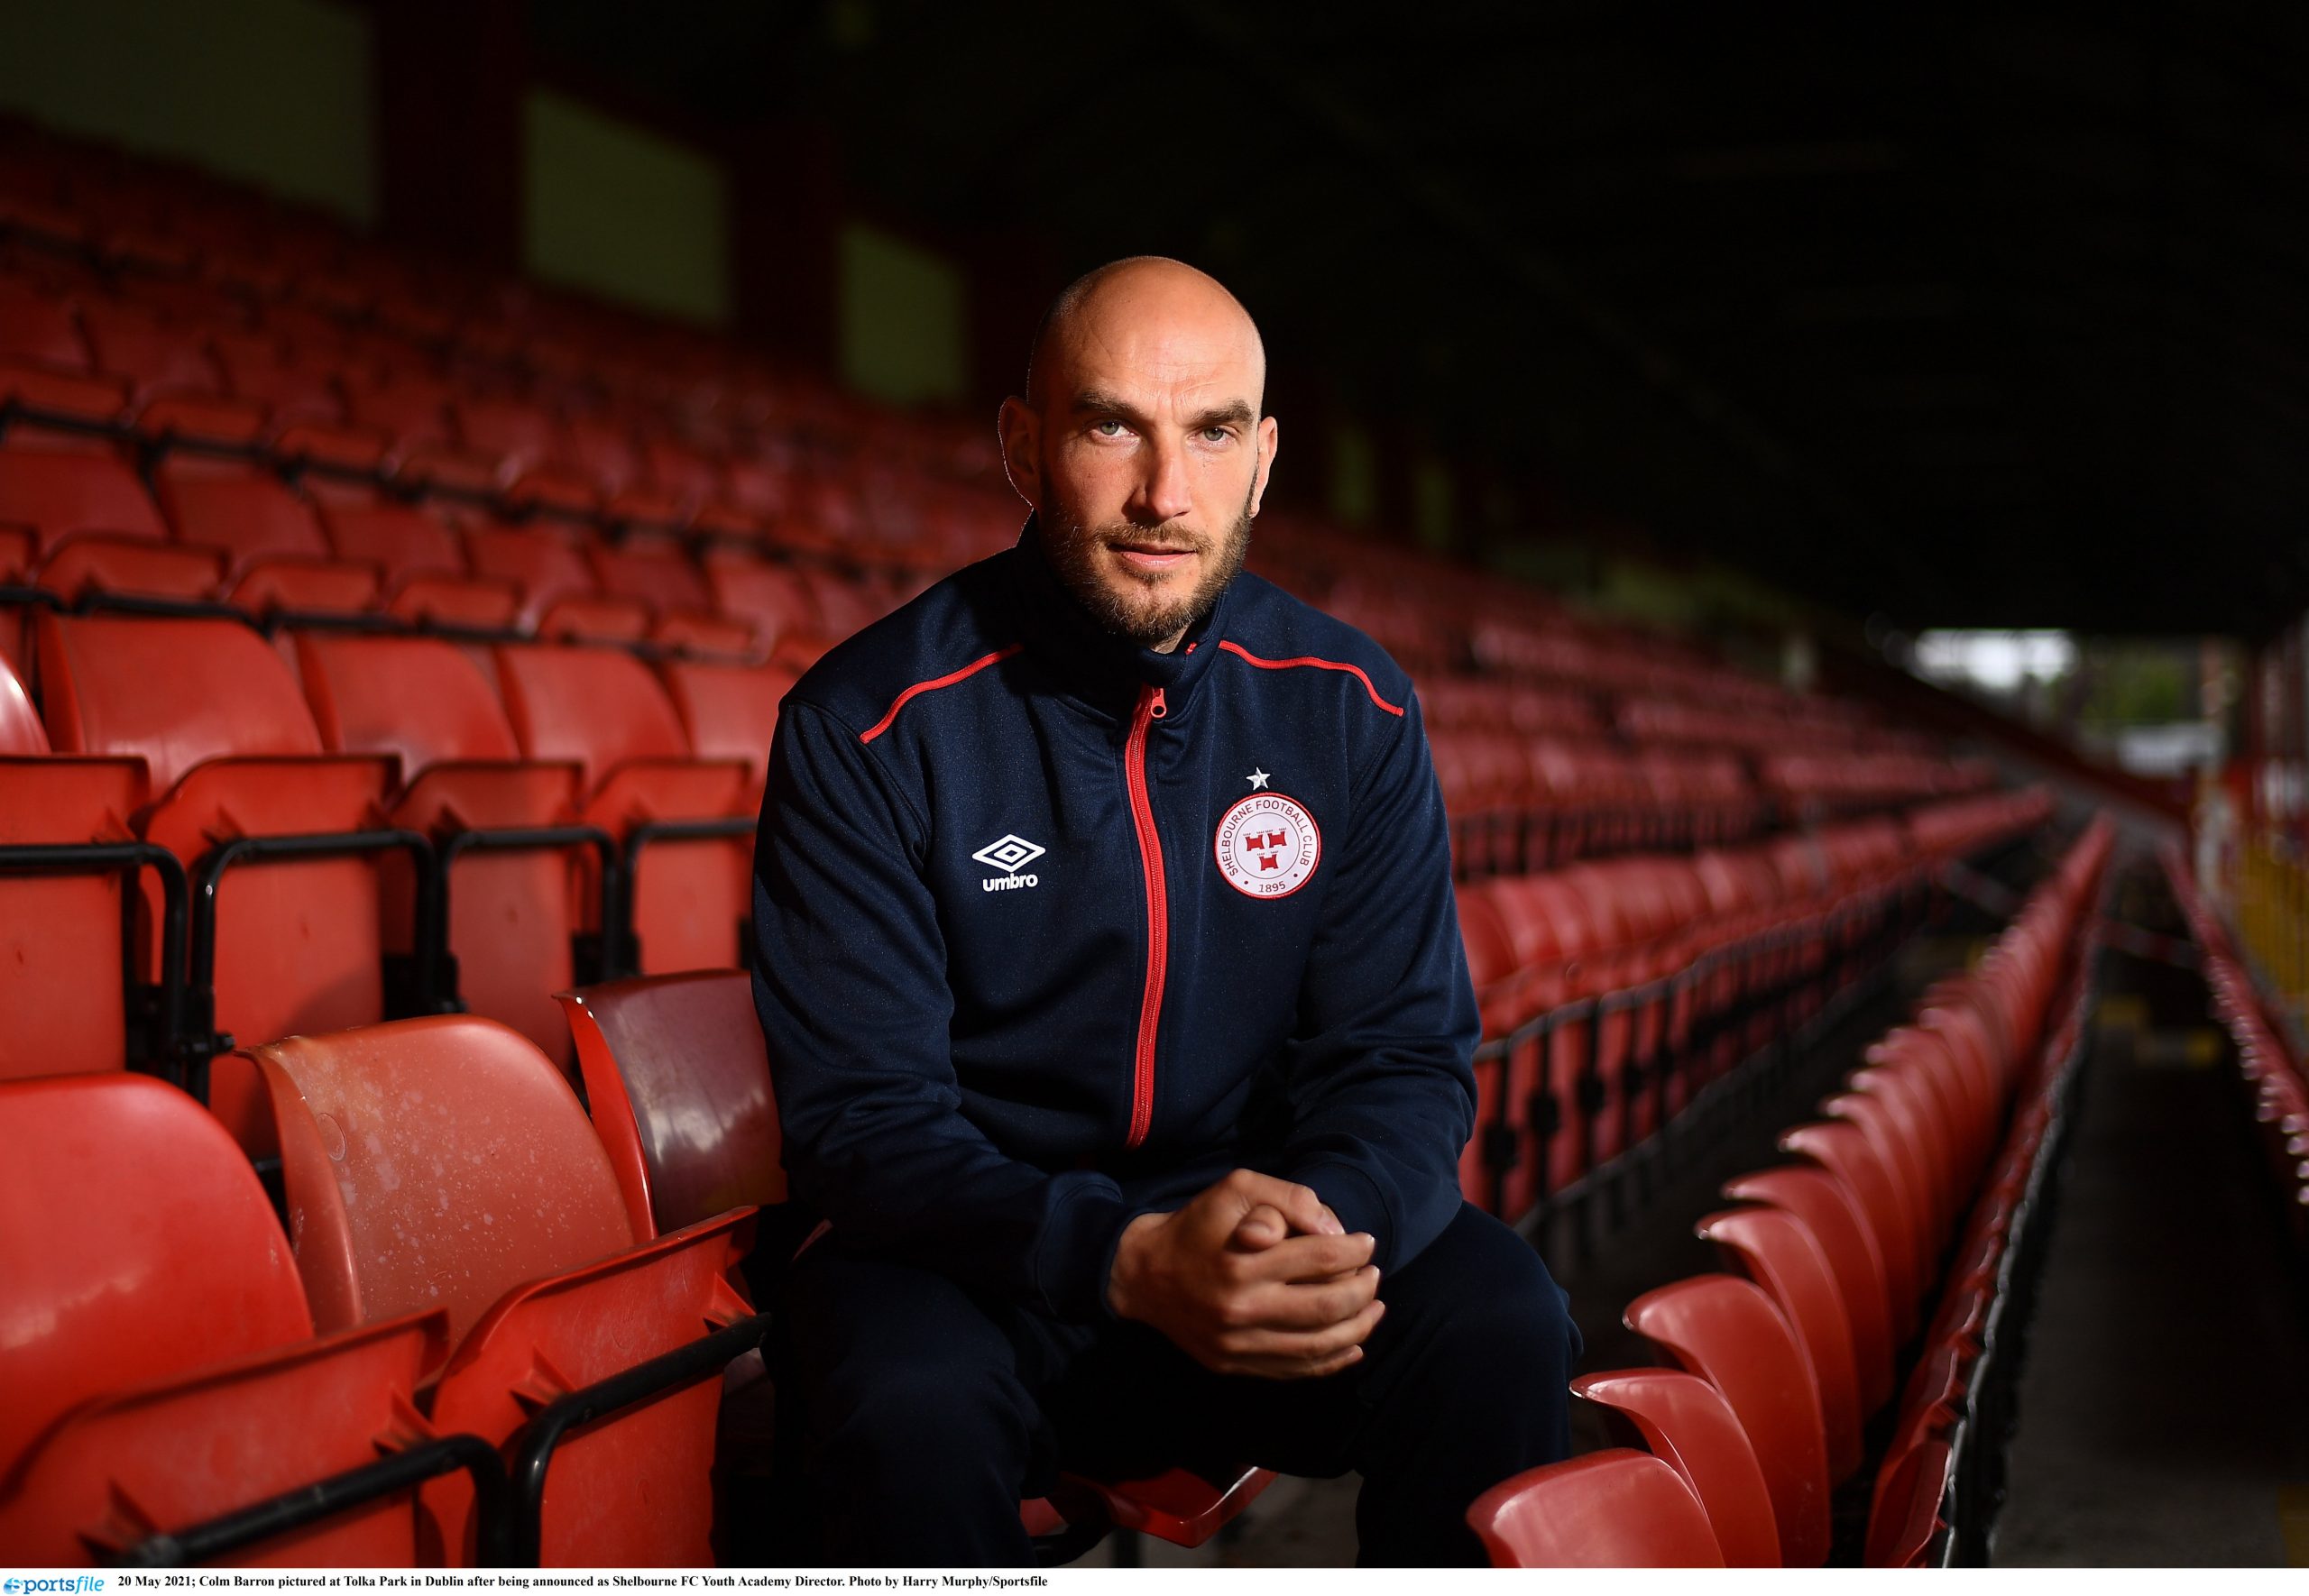 Colm Barron appointed Head of Shelbourne FC Youth Academy